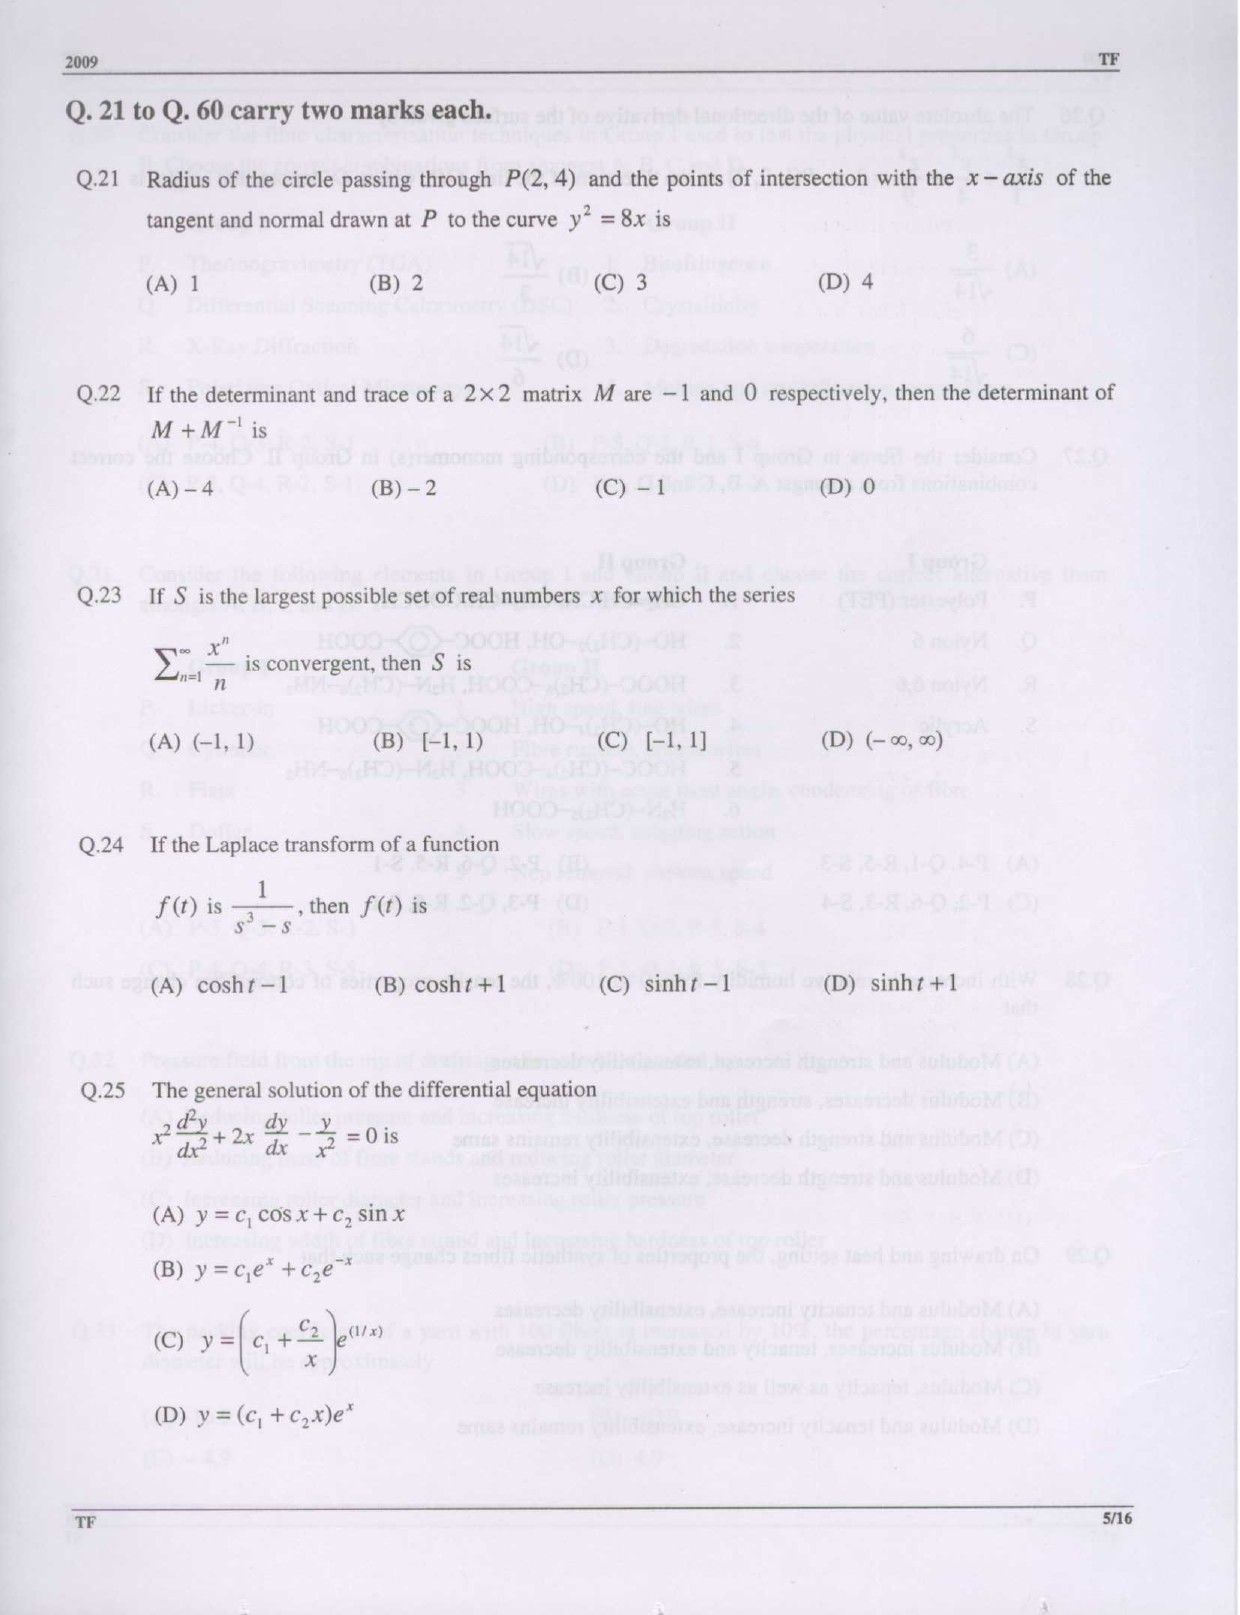 GATE Exam Question Paper 2009 Textile Engineering and Fibre Science 5